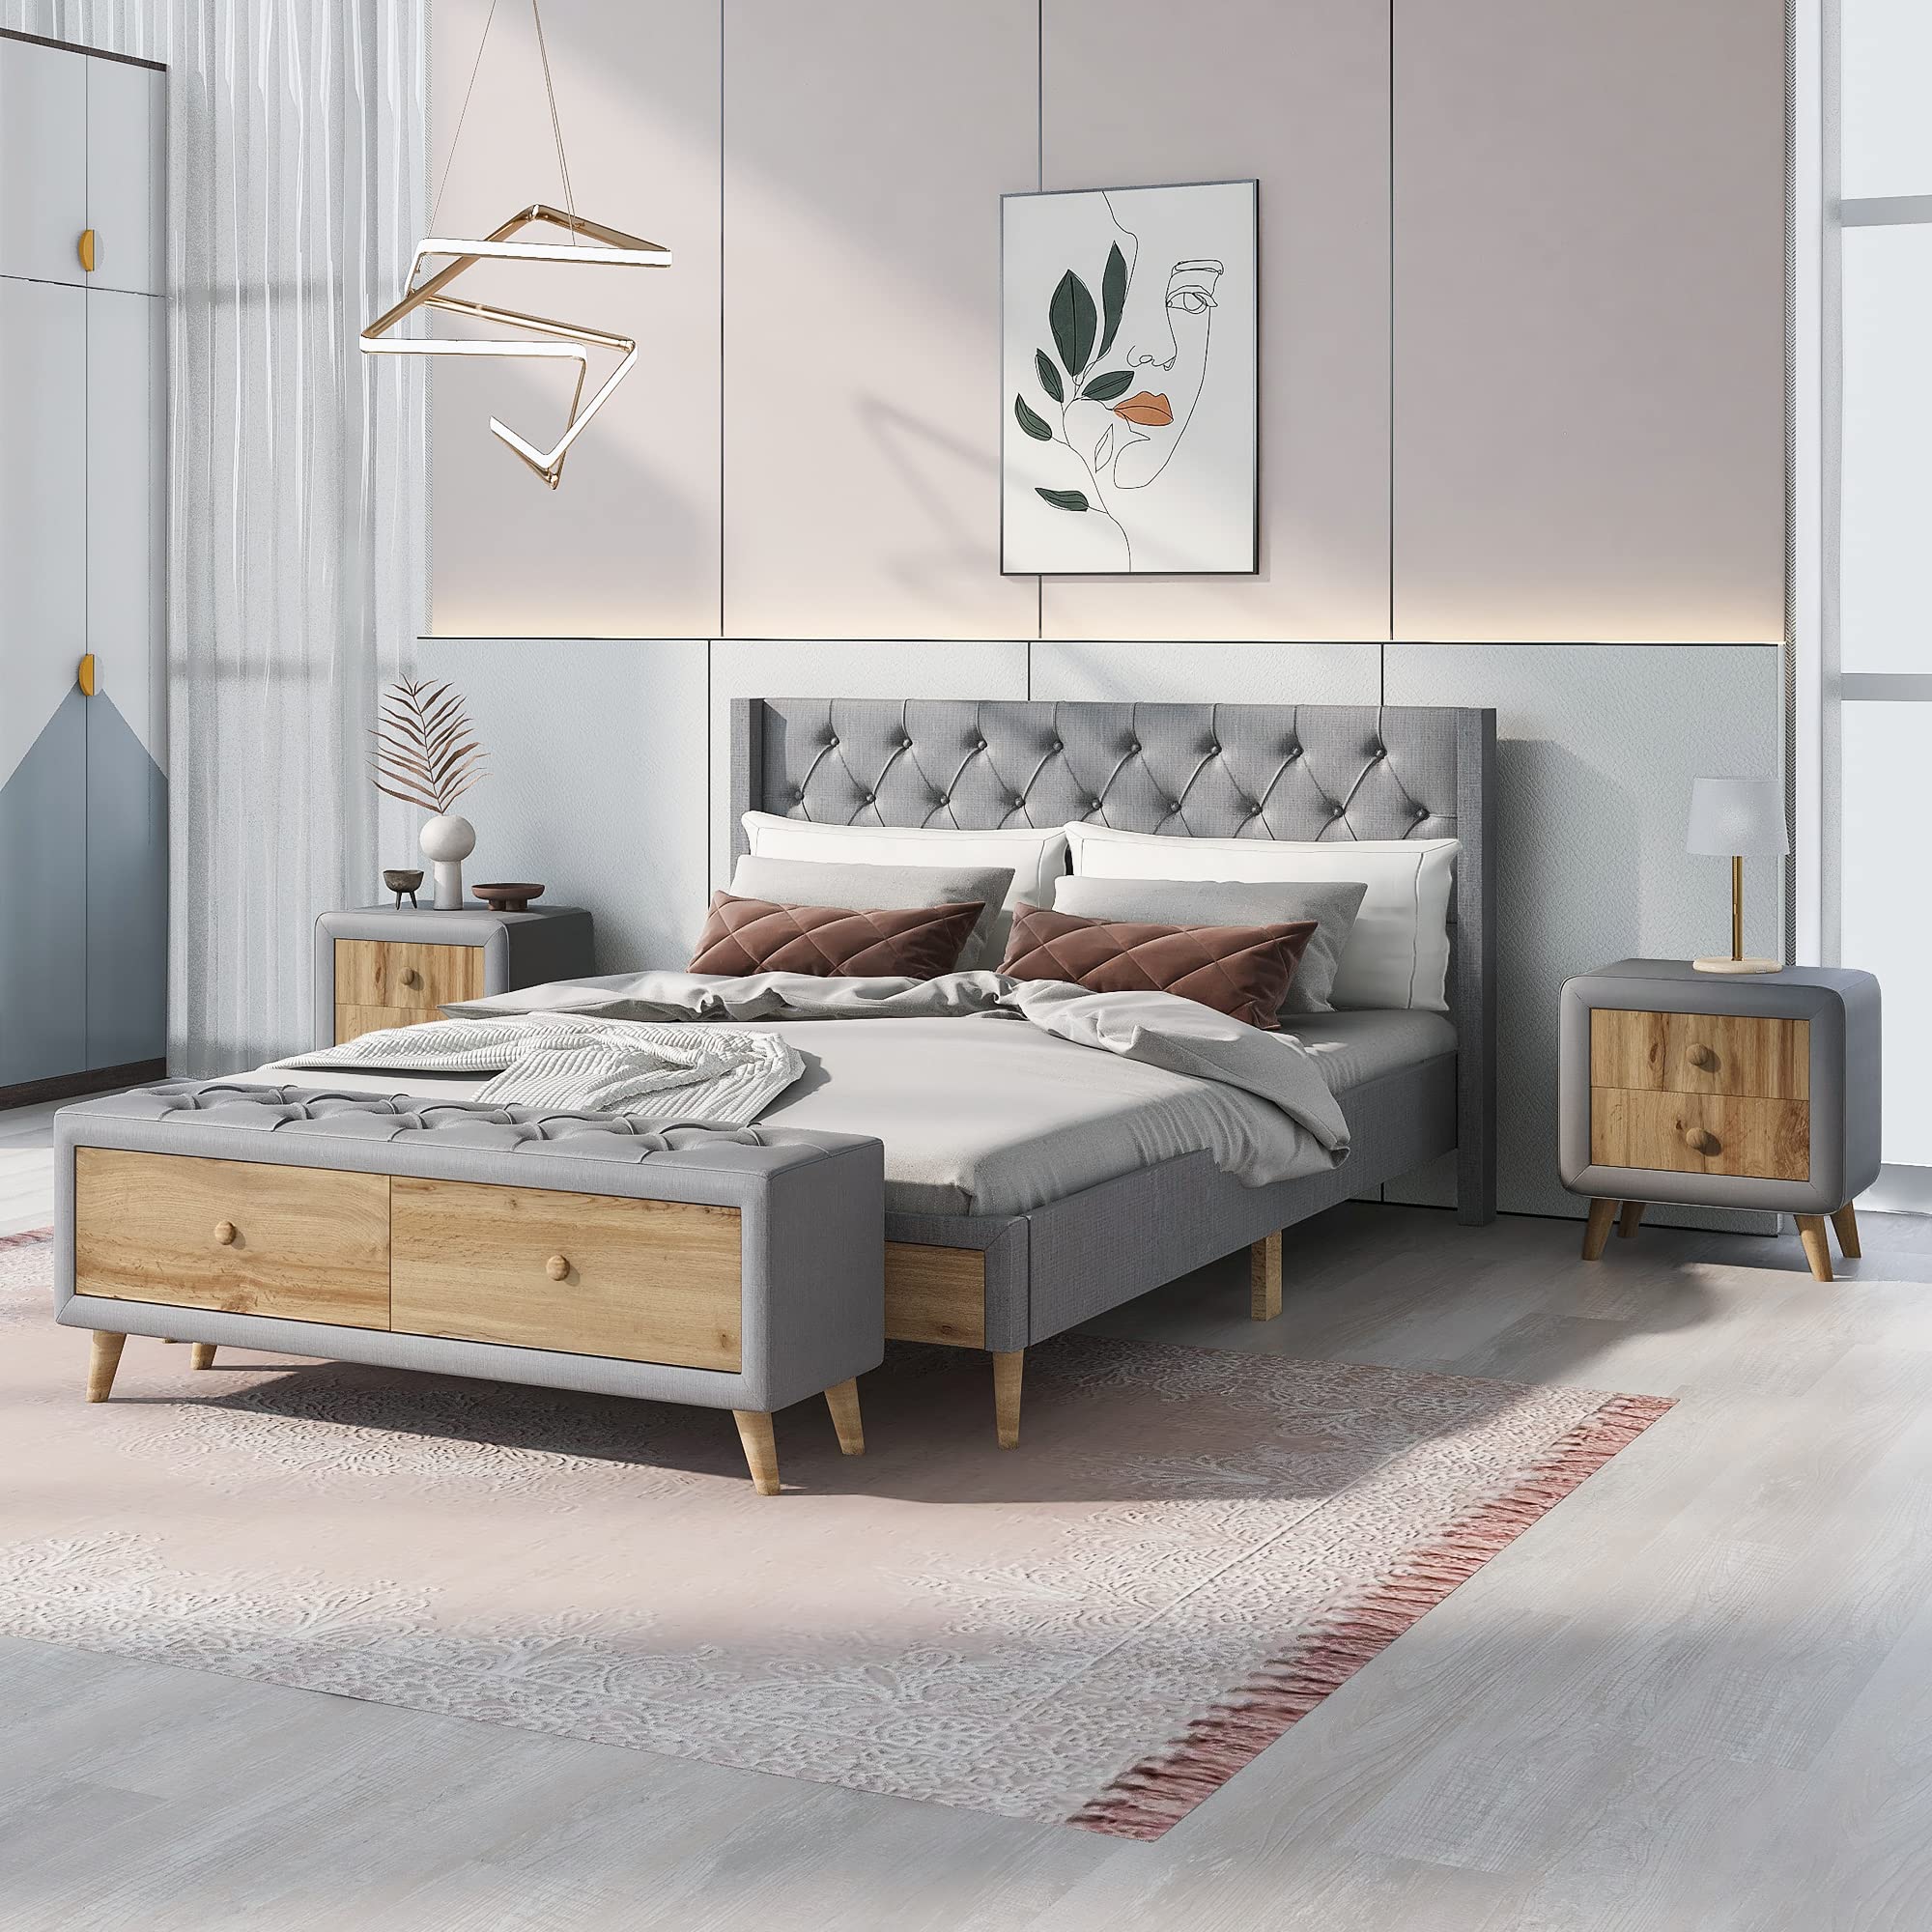 Harper & Bright Designs Bedroom Sets Queen Size Upholstered Platform Bed with Two Nightstands and Storage Bench 4-Pieces Bedroom